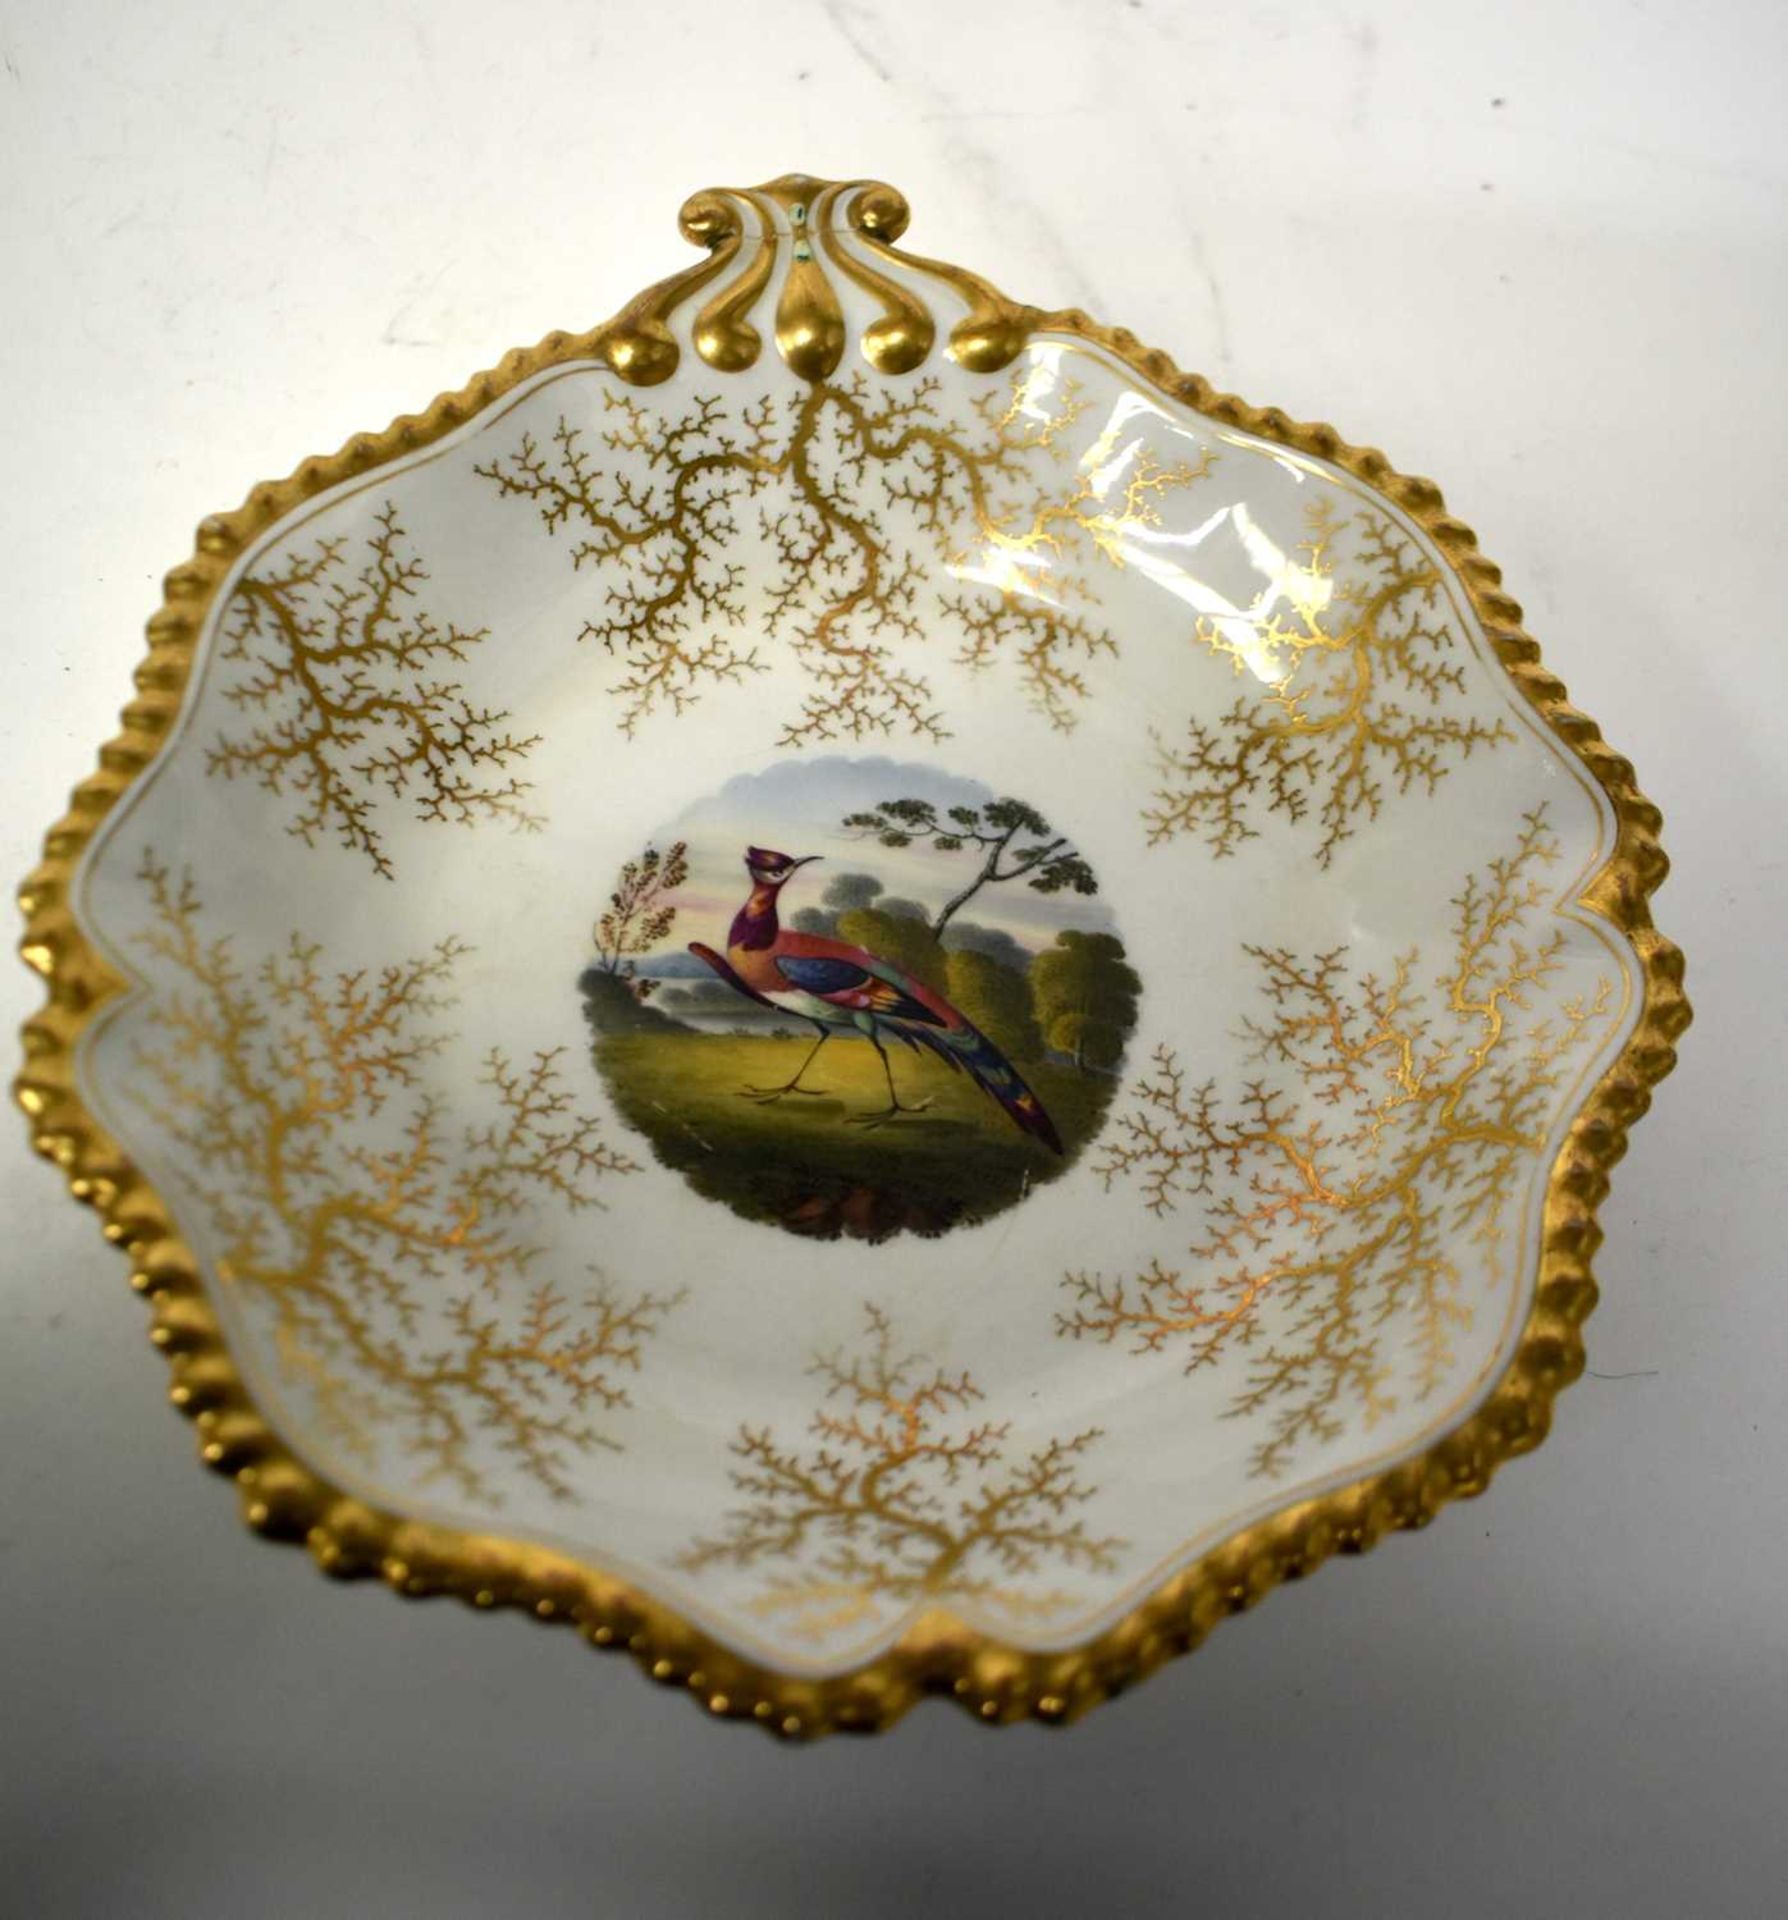 A FINE EARLY 19TH CENTURY FLIGHT BARR AND BARR WORCESTER DESSERT SERVICE painted with landscapes and - Image 23 of 32